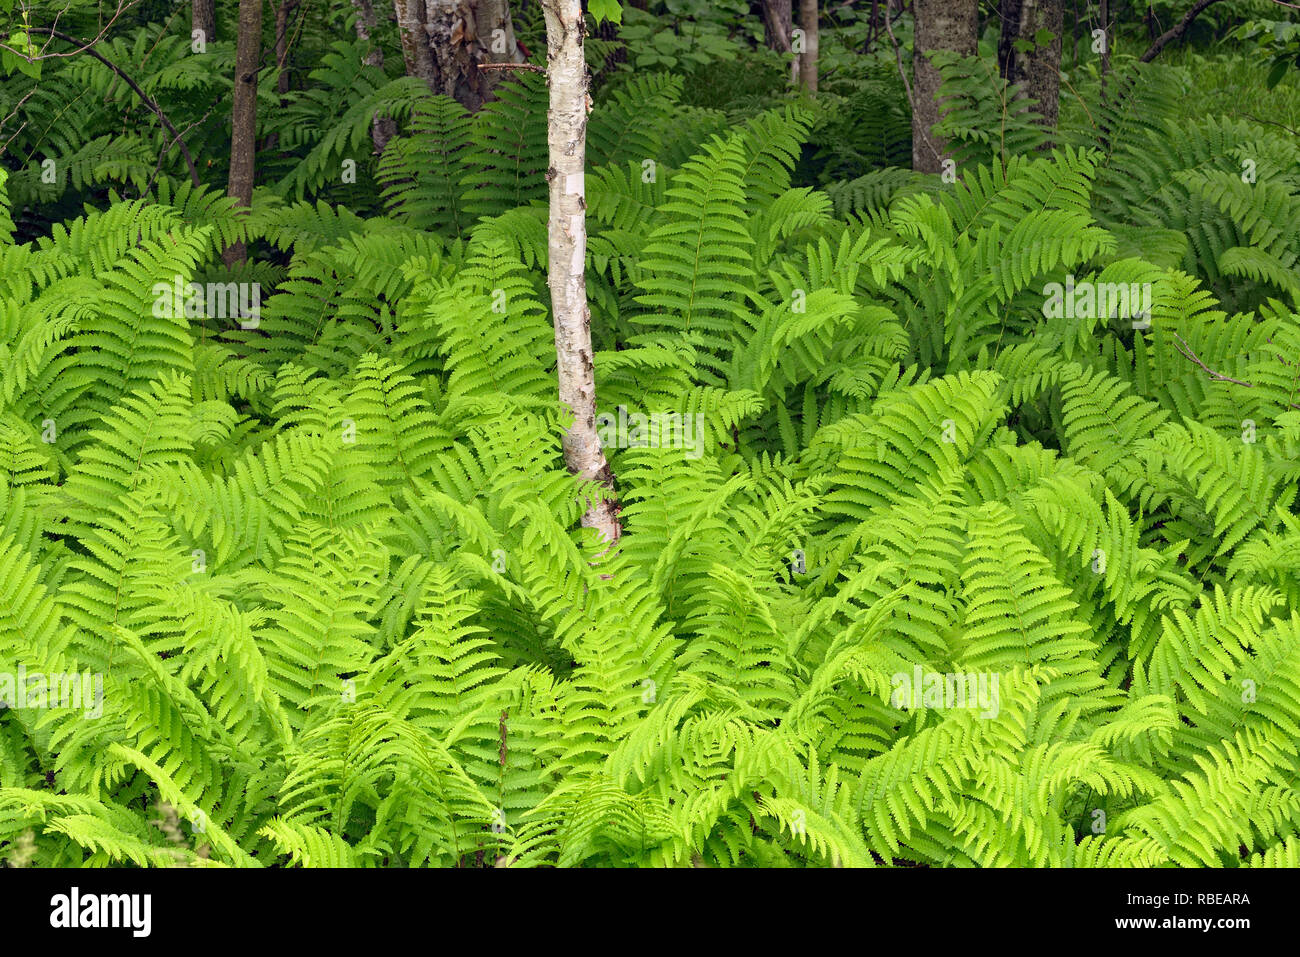 Ferns in the understory of a deciduous woodland, Hwy 63 near Hayward, Wisconsin, USA Stock Photo